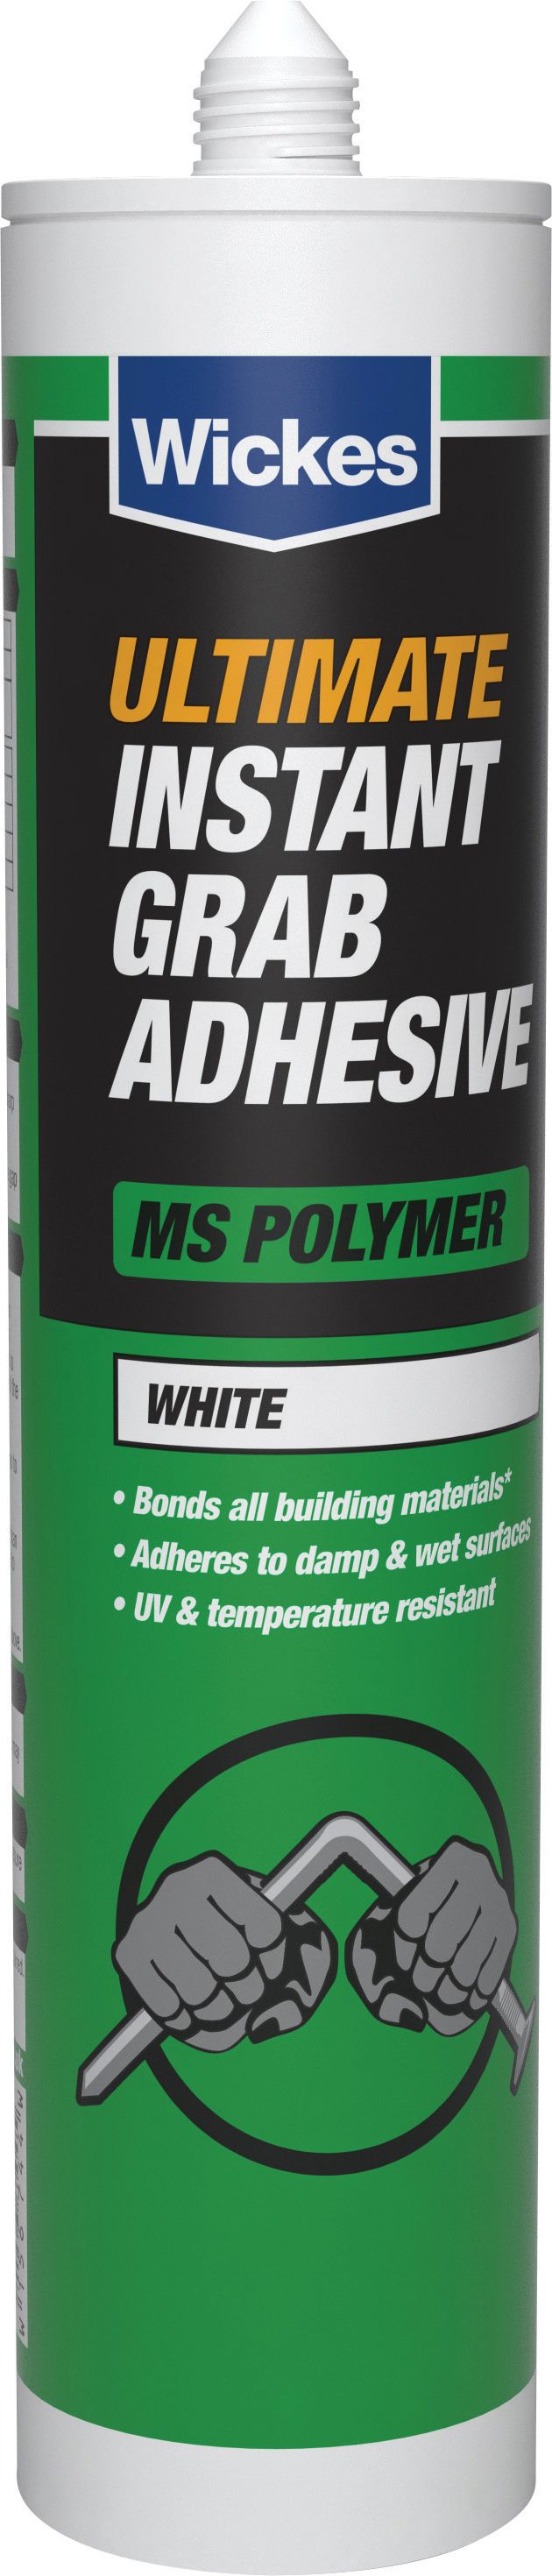 Wickes White Ultimate Instant Grab Adhesive - 290ml